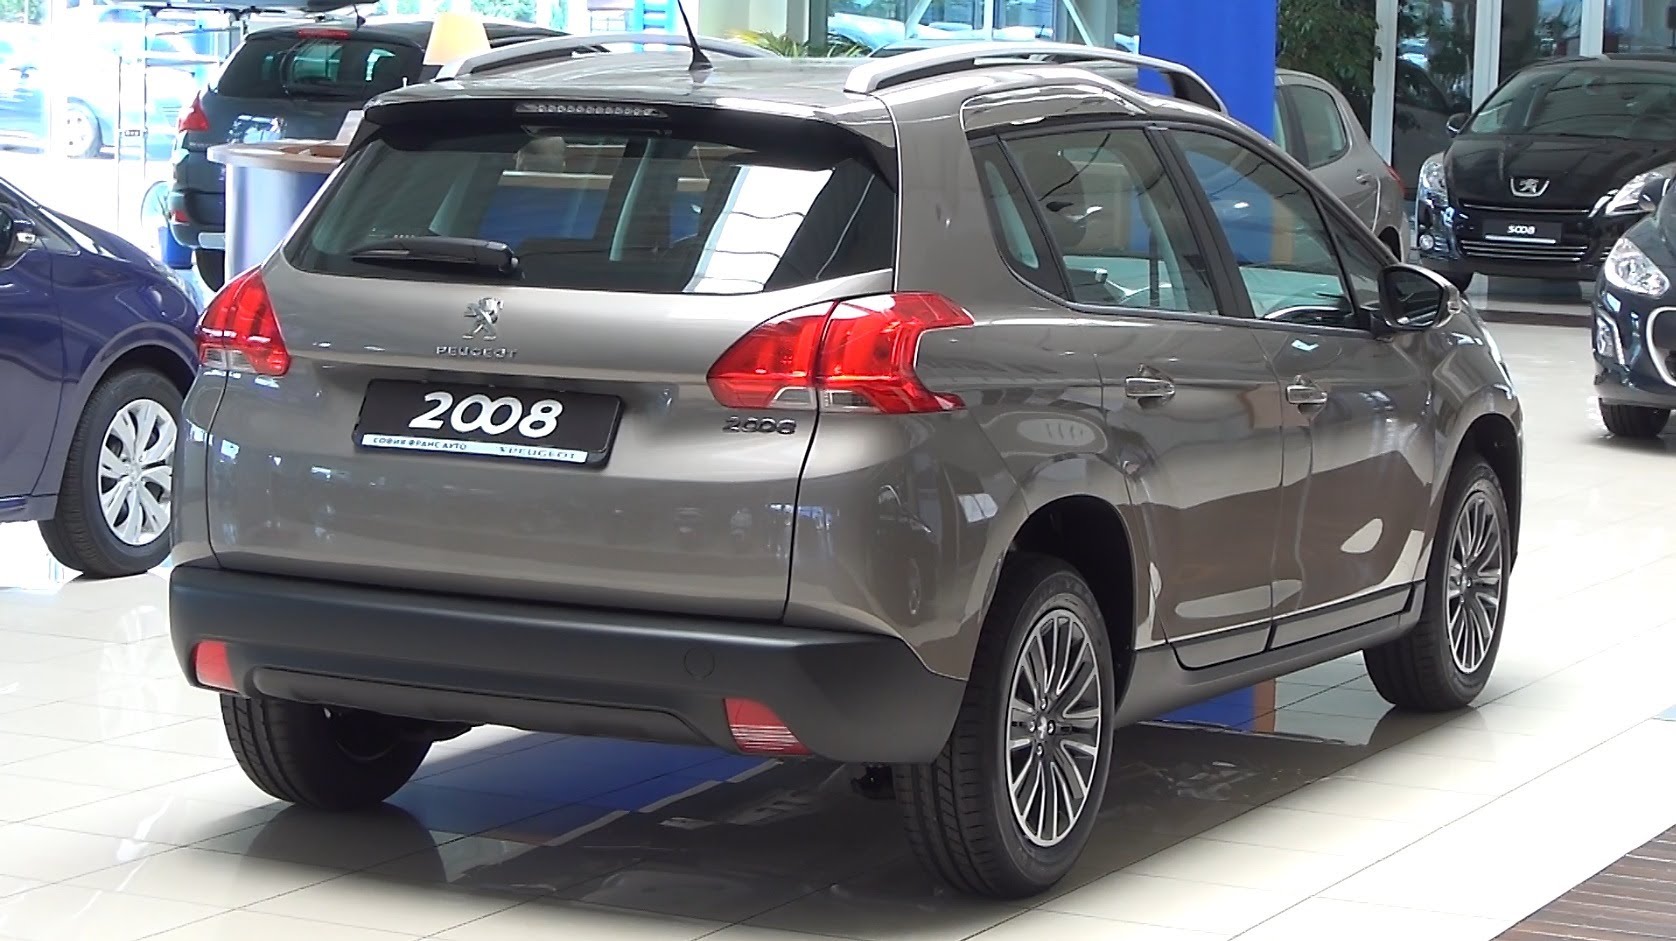 Peugeot 2008 technical specifications and fuel economy